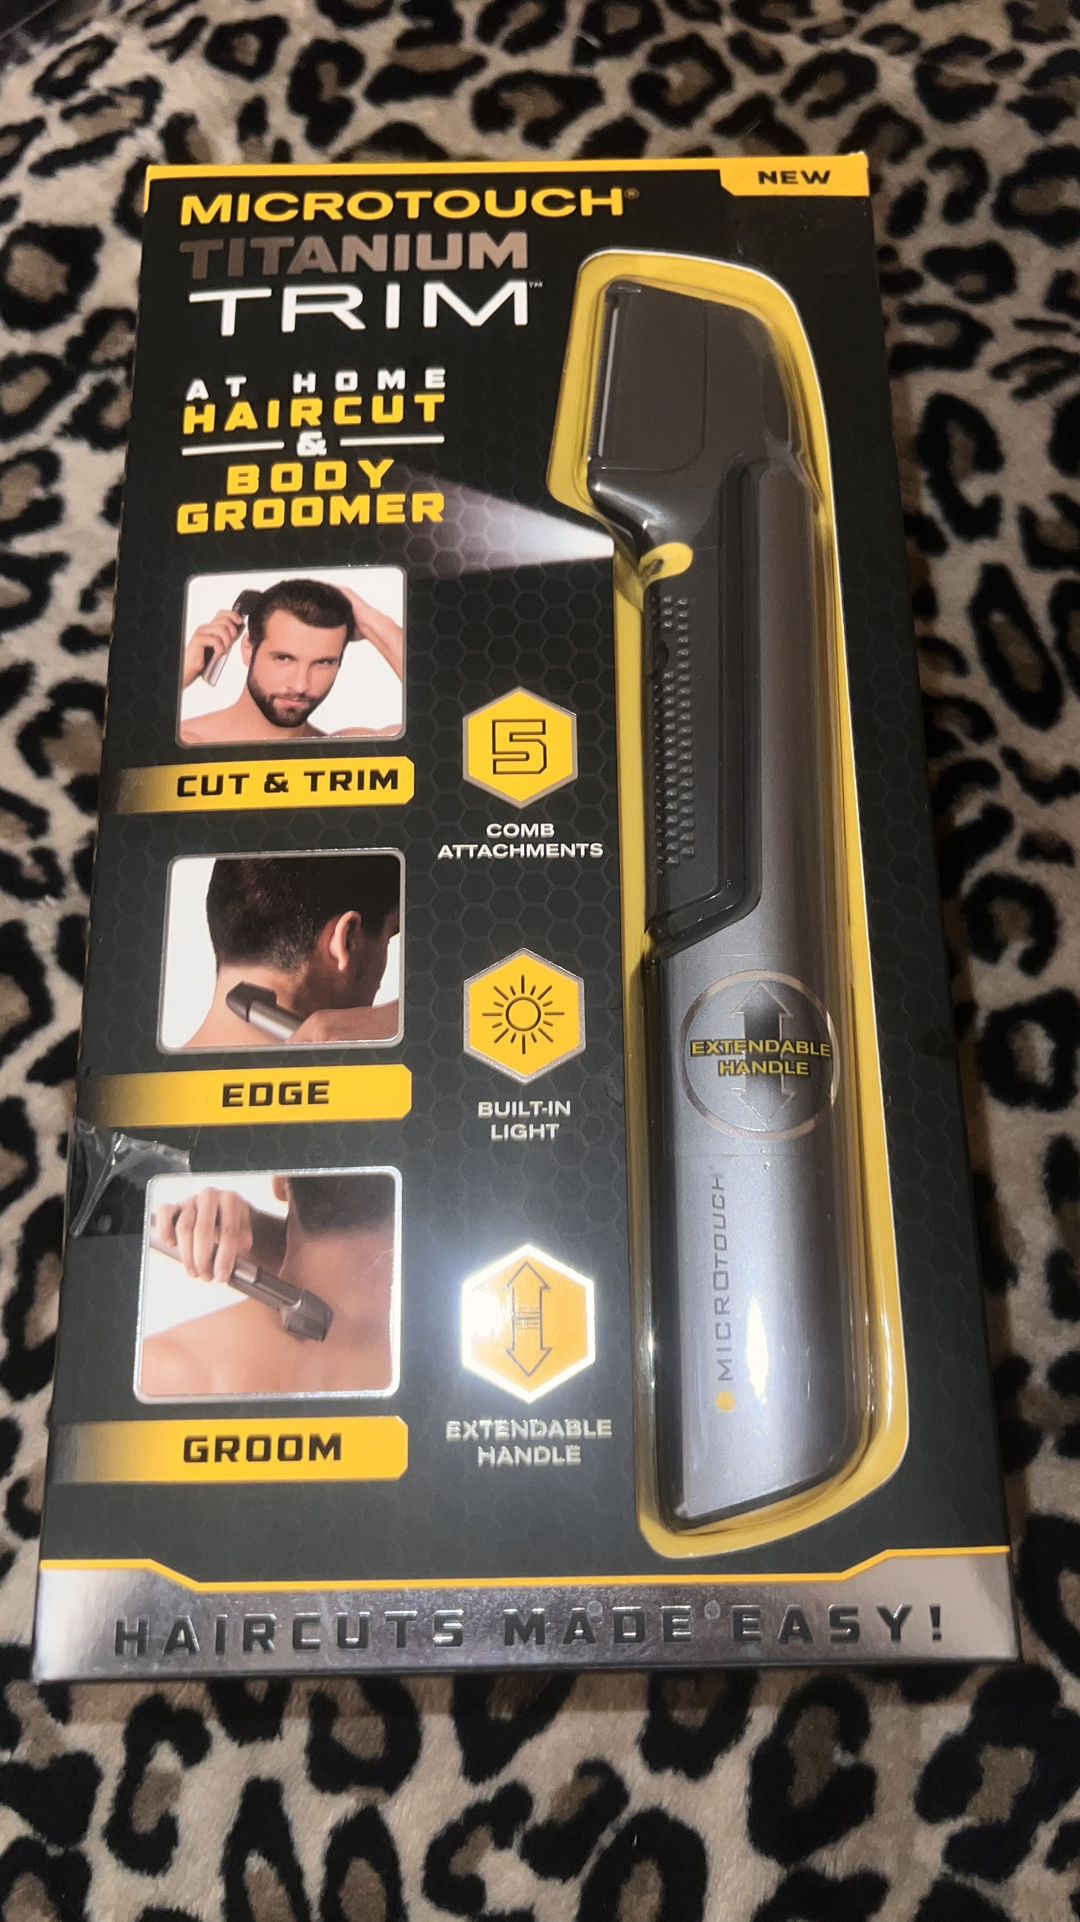 Hair Shaver And Body Groomer